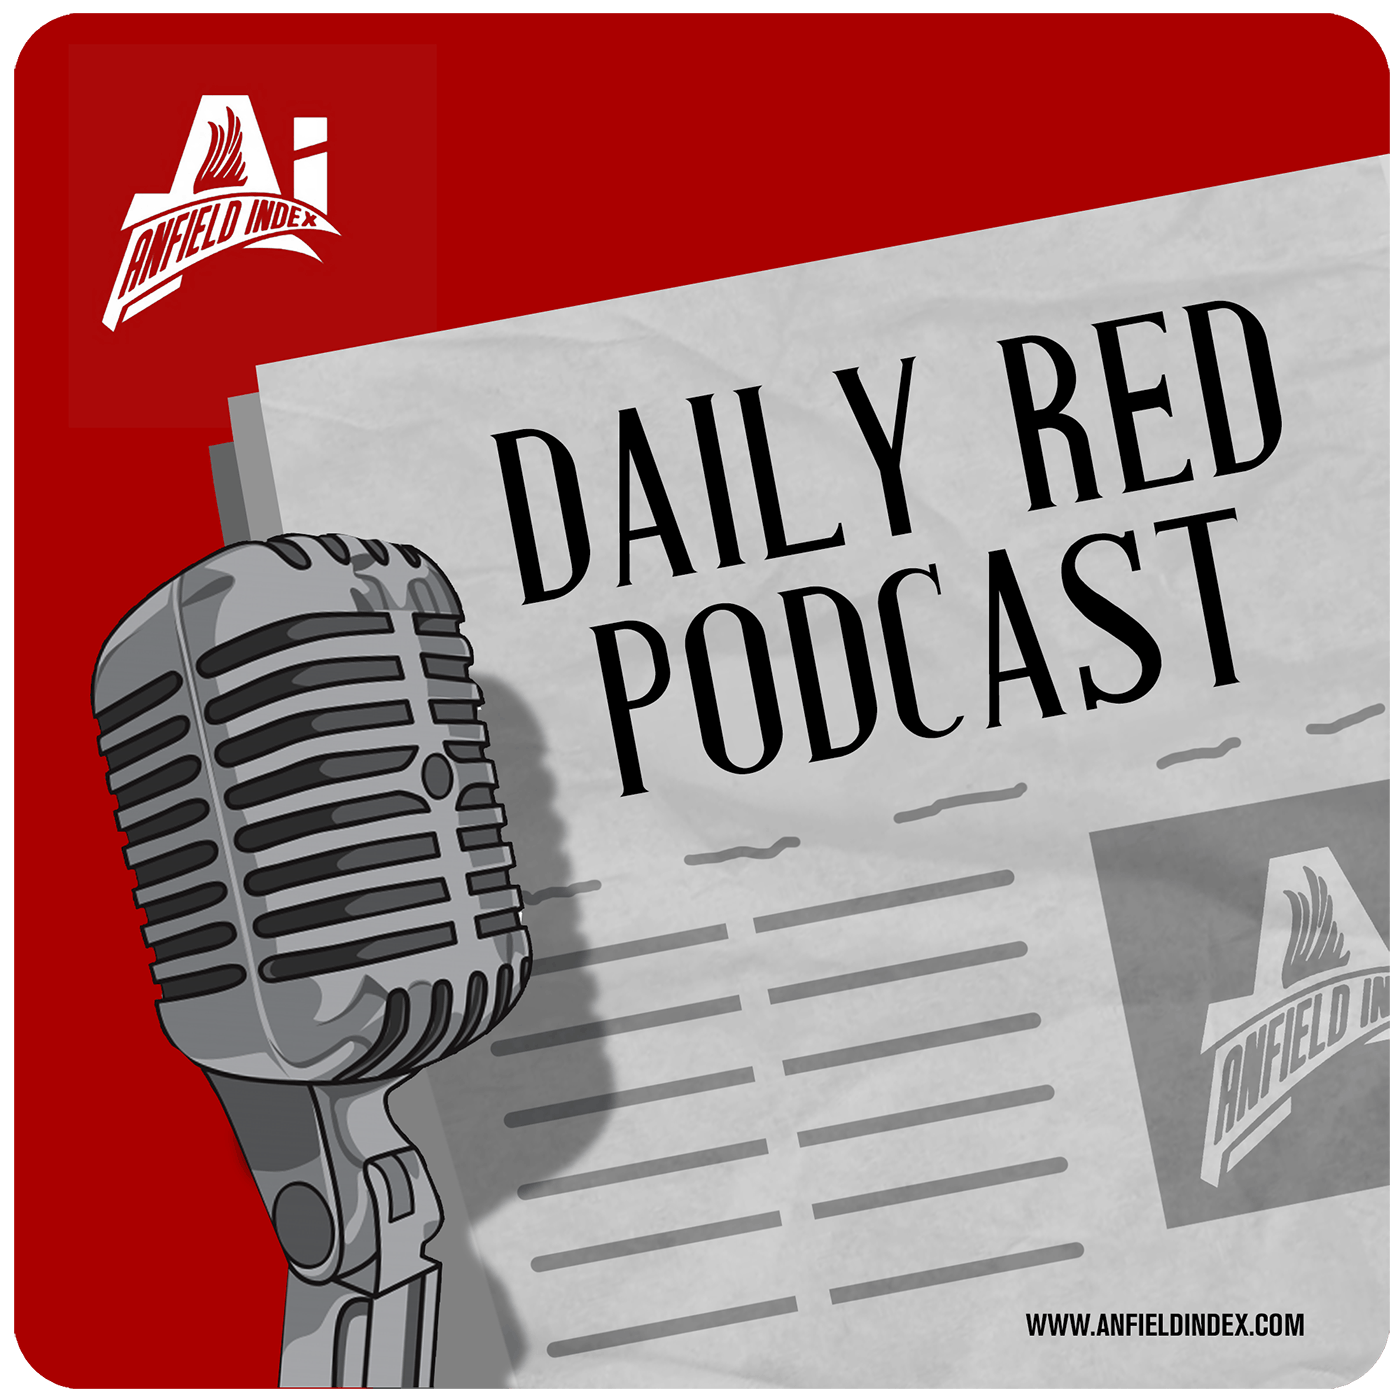 Luton & Injuries - Daily Red Podcast